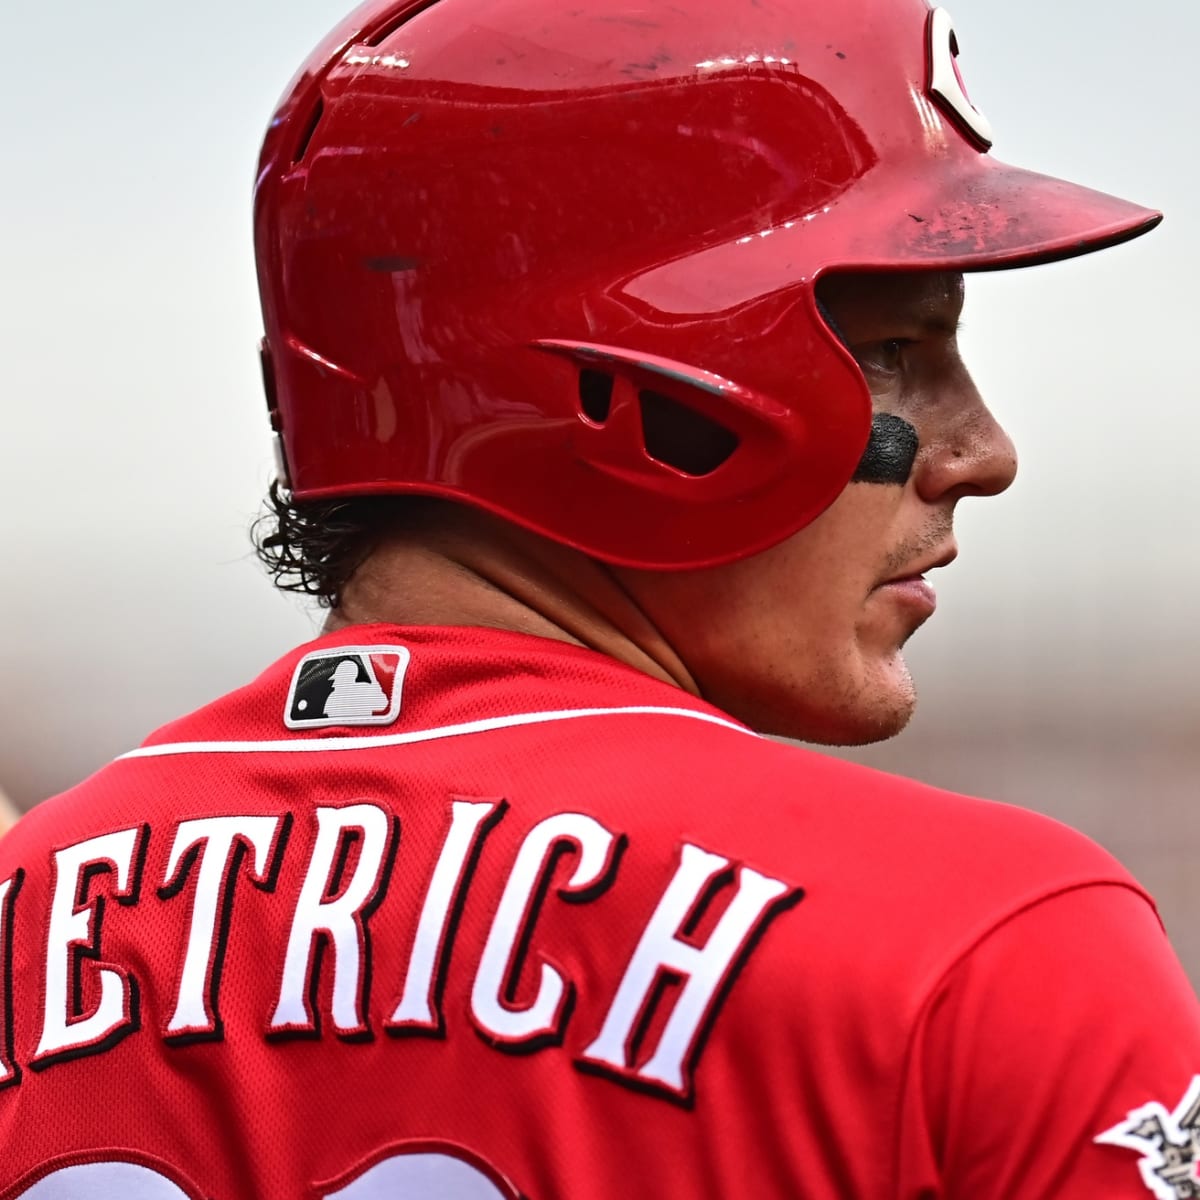 Rangers vs Mariners Pre-Game Notes: Derek Dietrich Signed to Minor